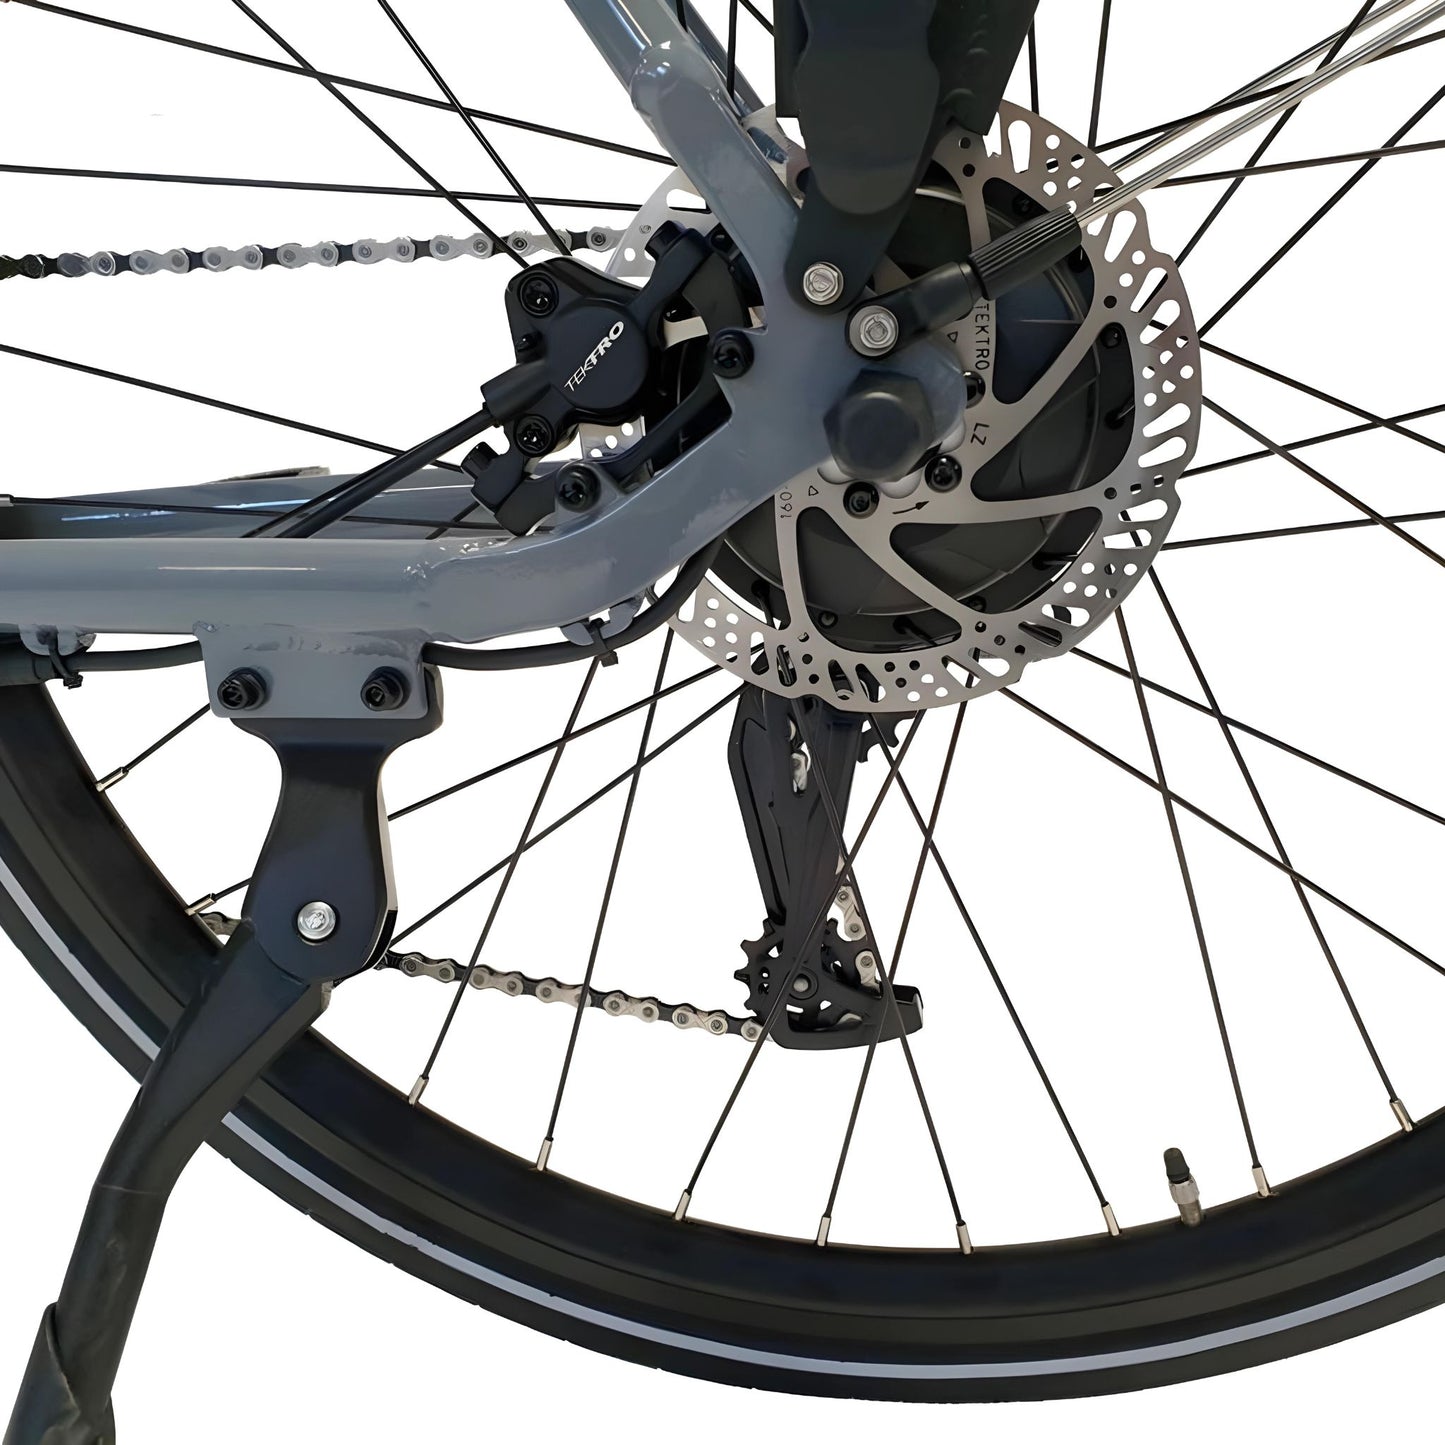 Detailed view of Geobike E-Urban's front disc brake